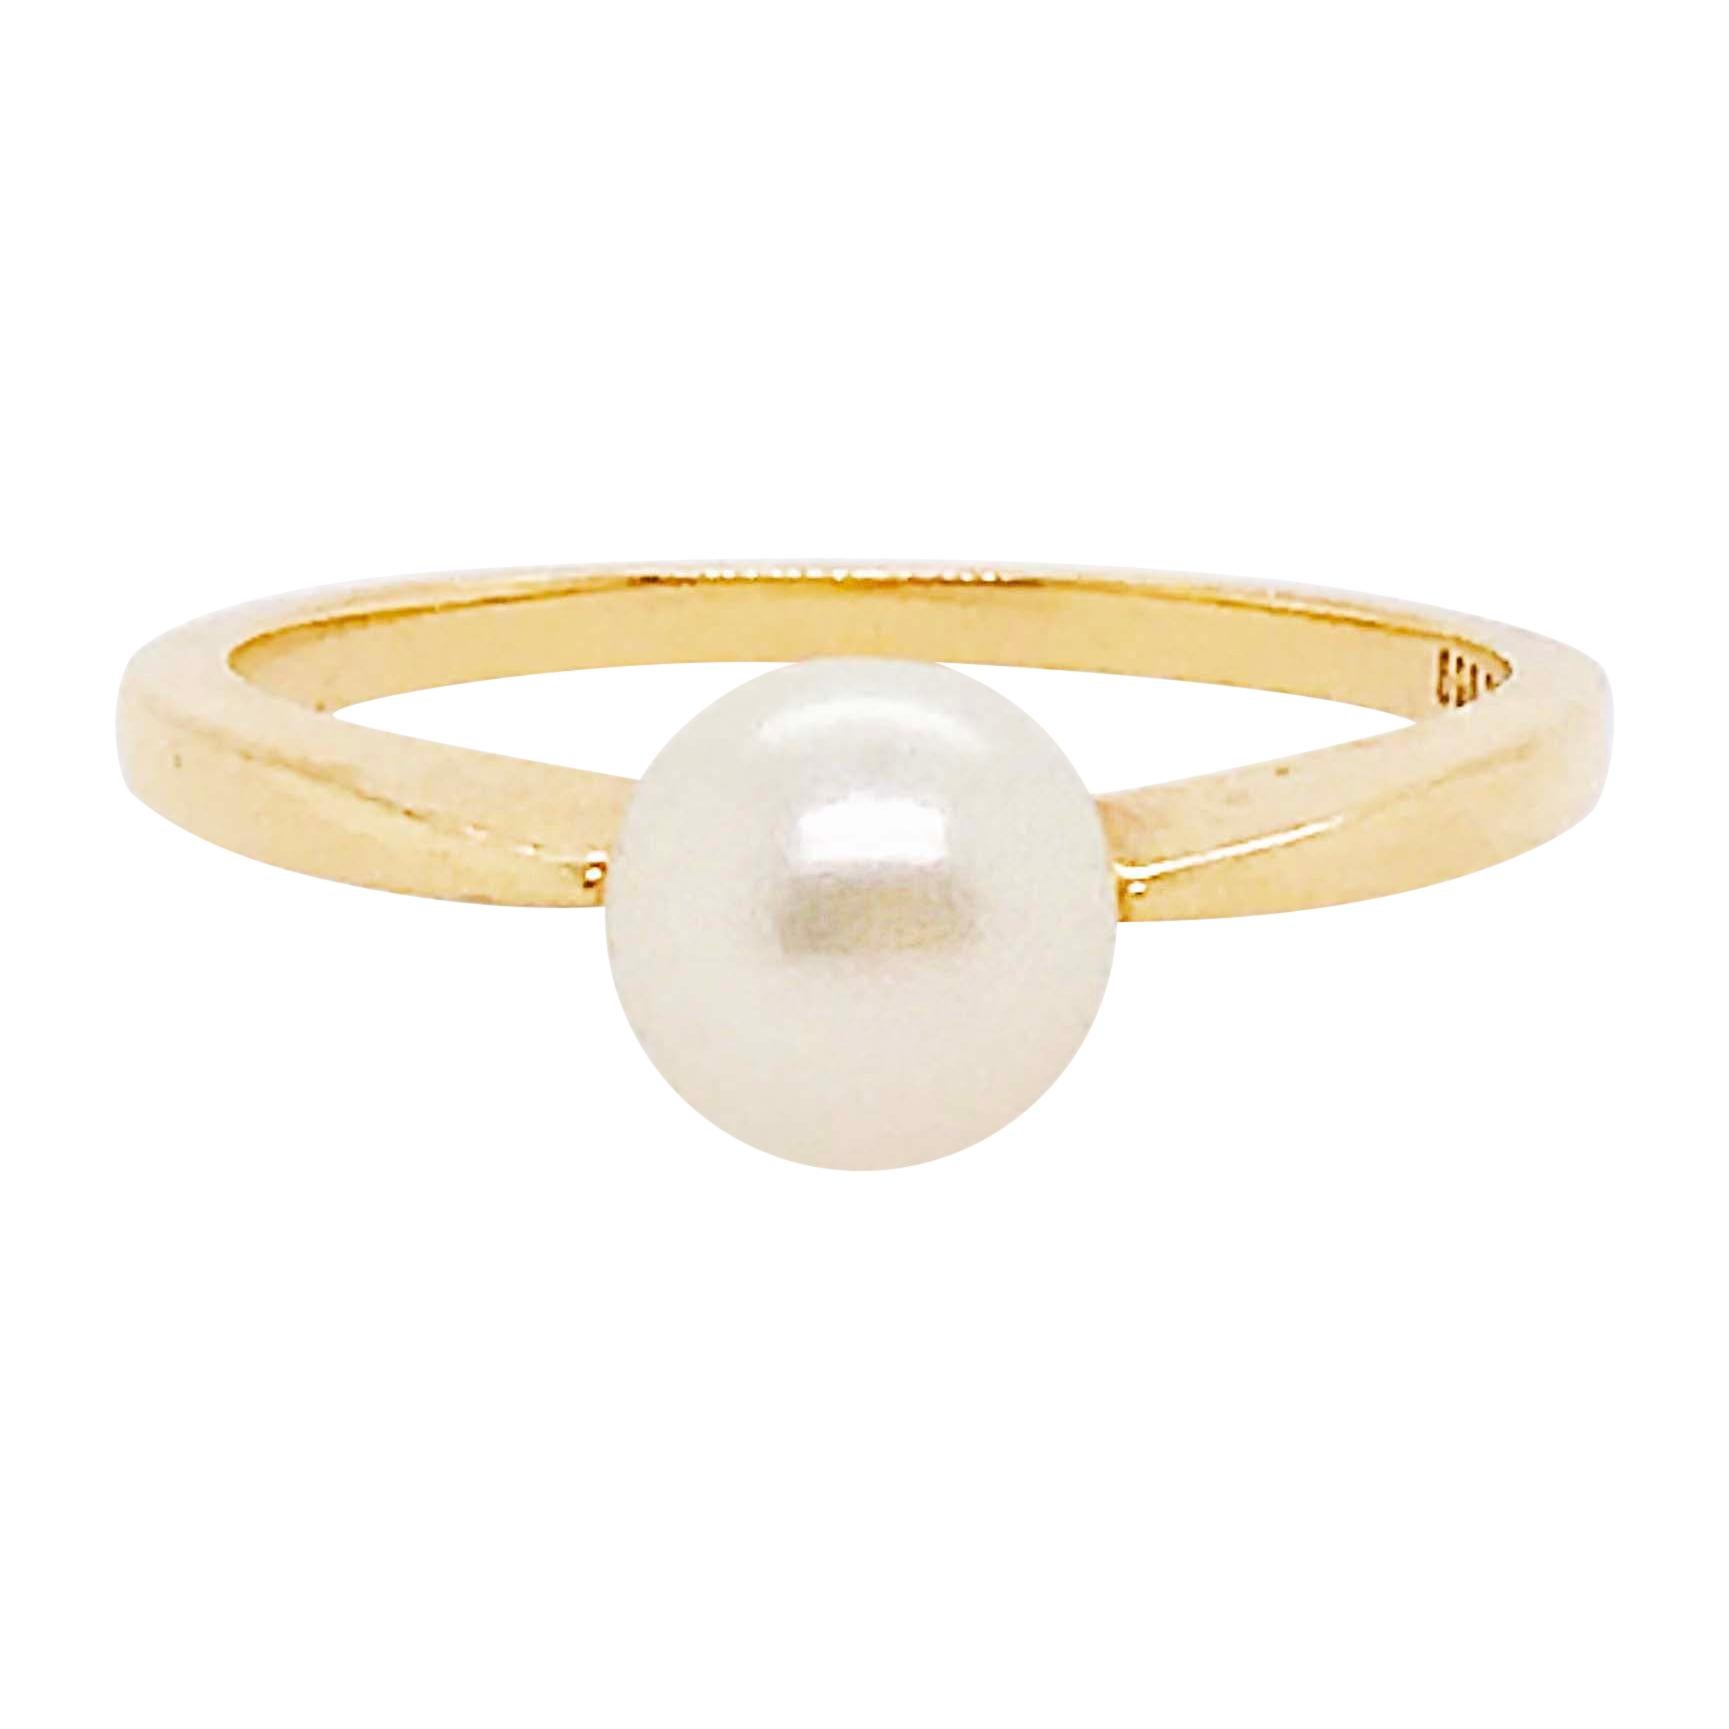 Akoya Pearl Solitaire Ring with Genuine Round Akoya Pearl in 14 Karat Gold